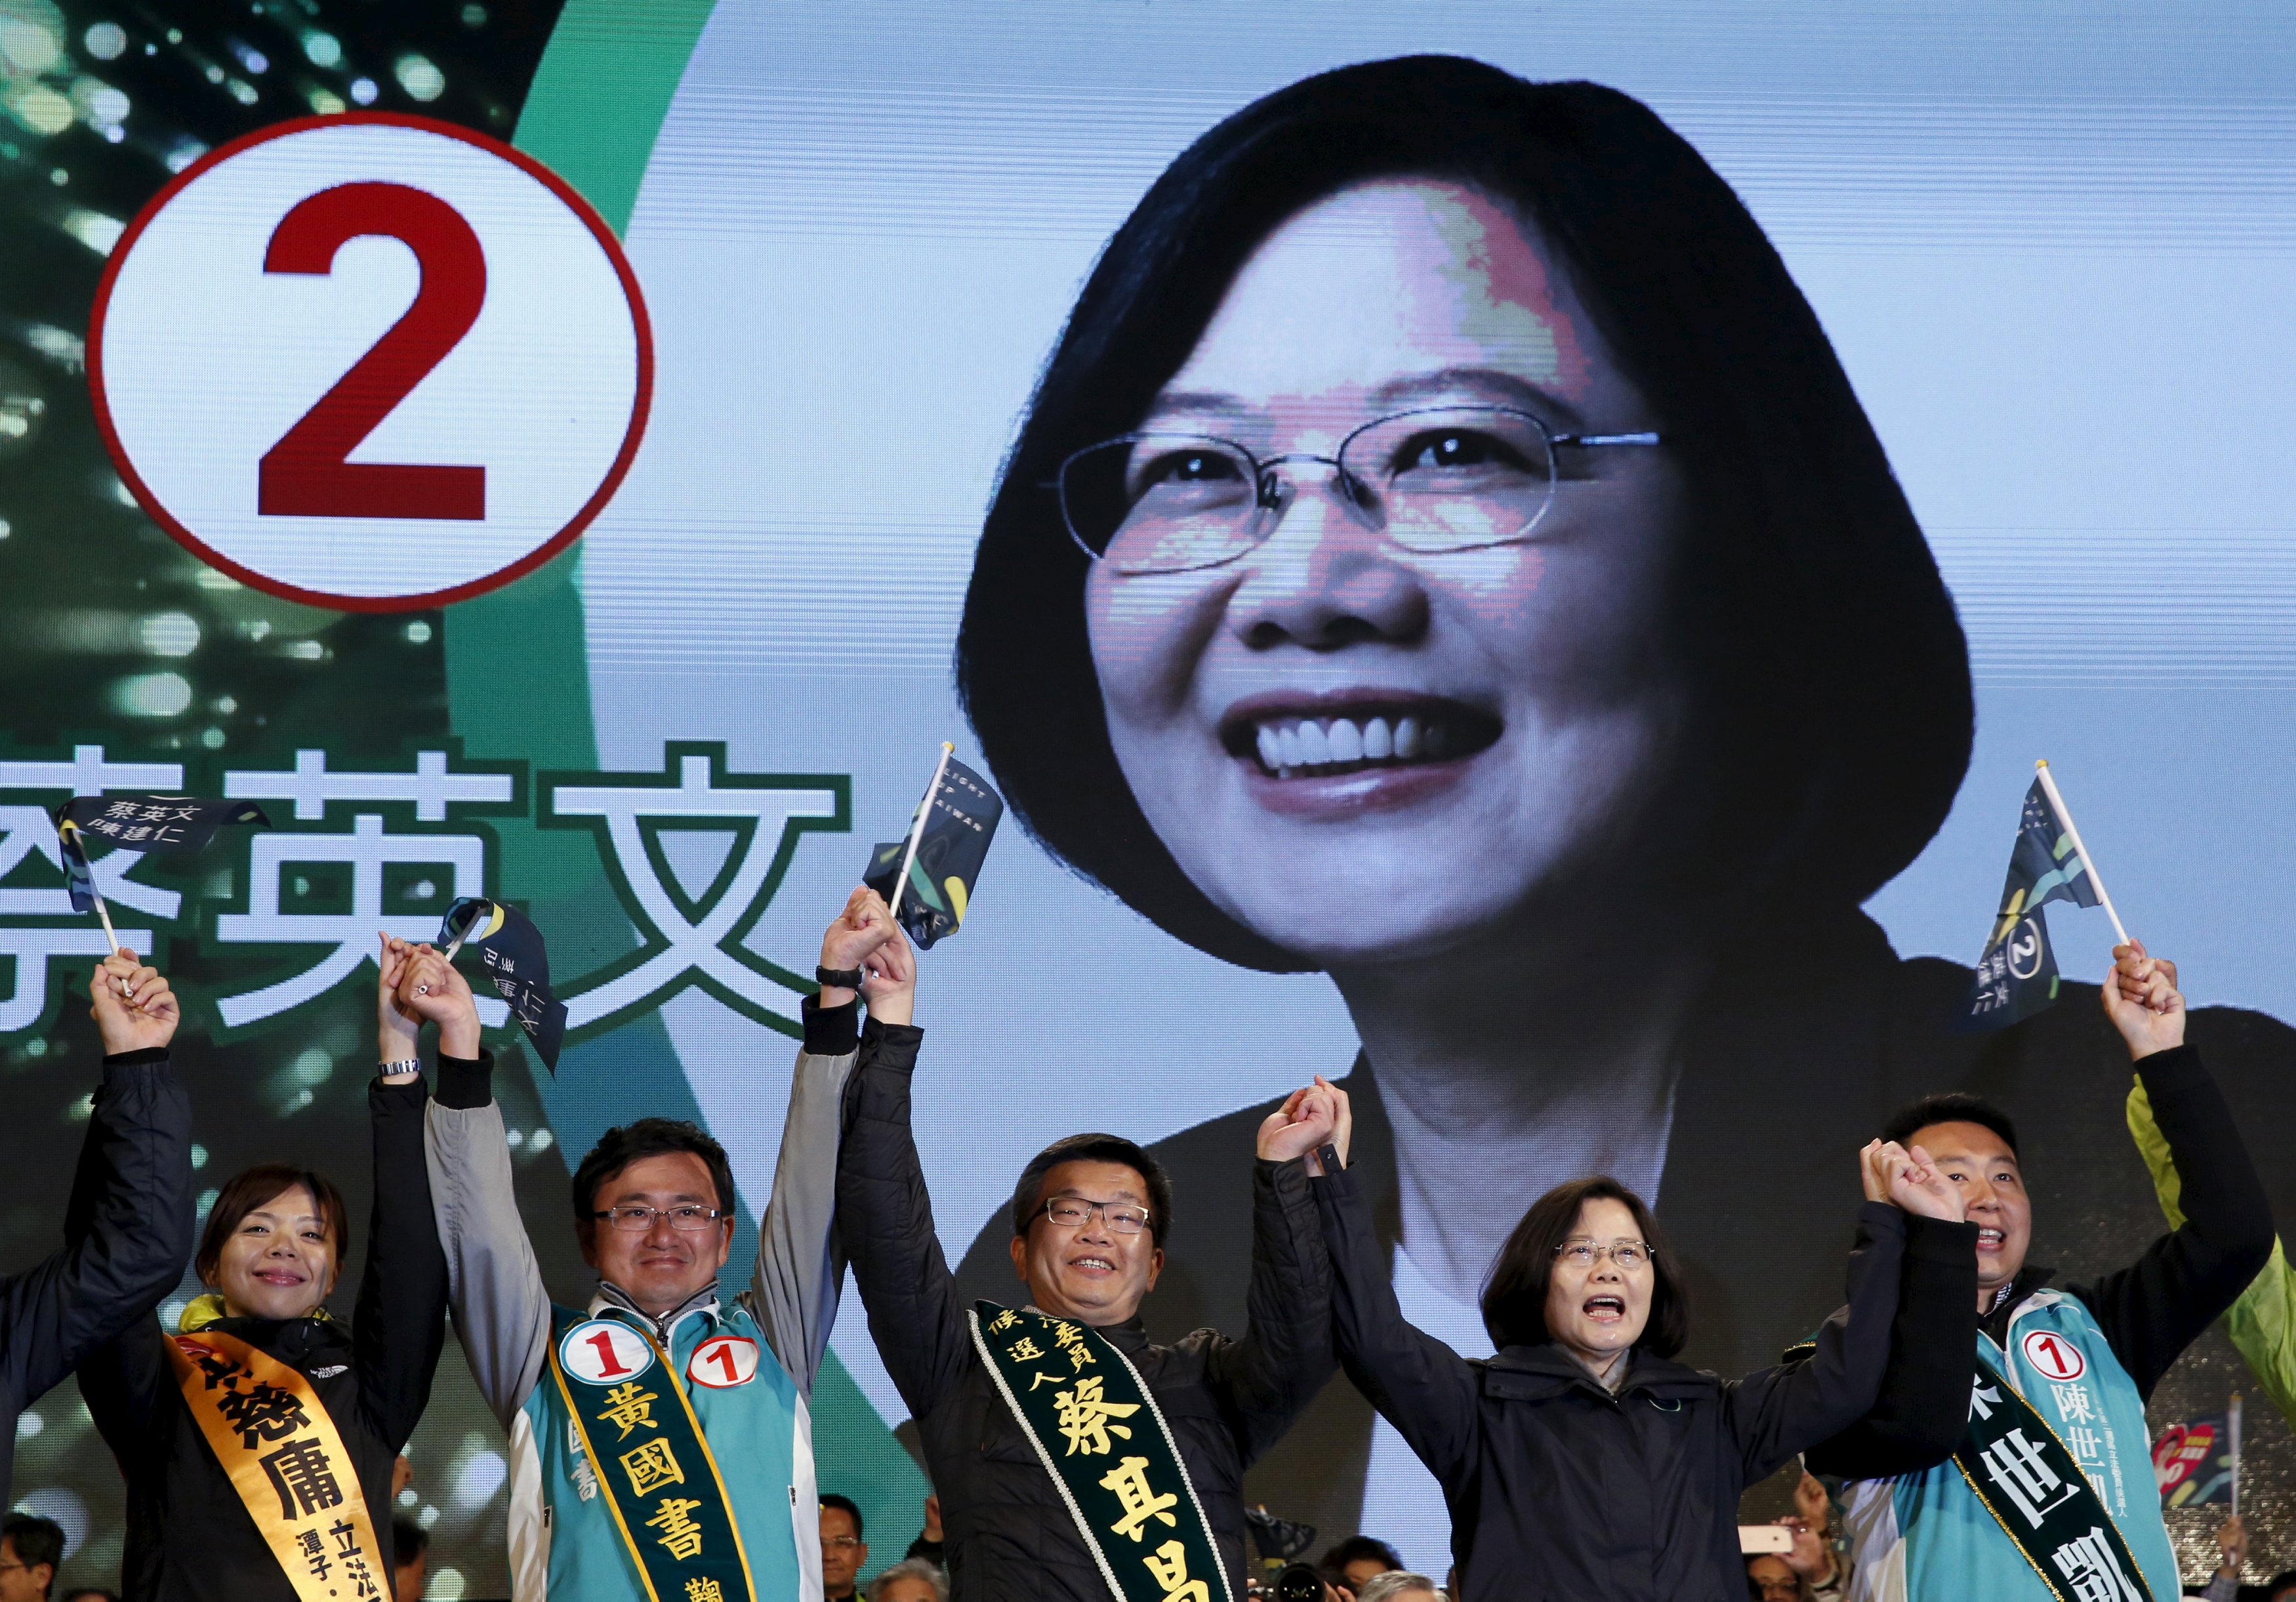 Taiwan's Democratic Progressive Party (DPP) Chairperson and presidential candidate Tsai Ing-wen shouts slogans during a campaign rally in Taichung, Taiwan, January 13, 2016. REUTERS/Olivia Harris